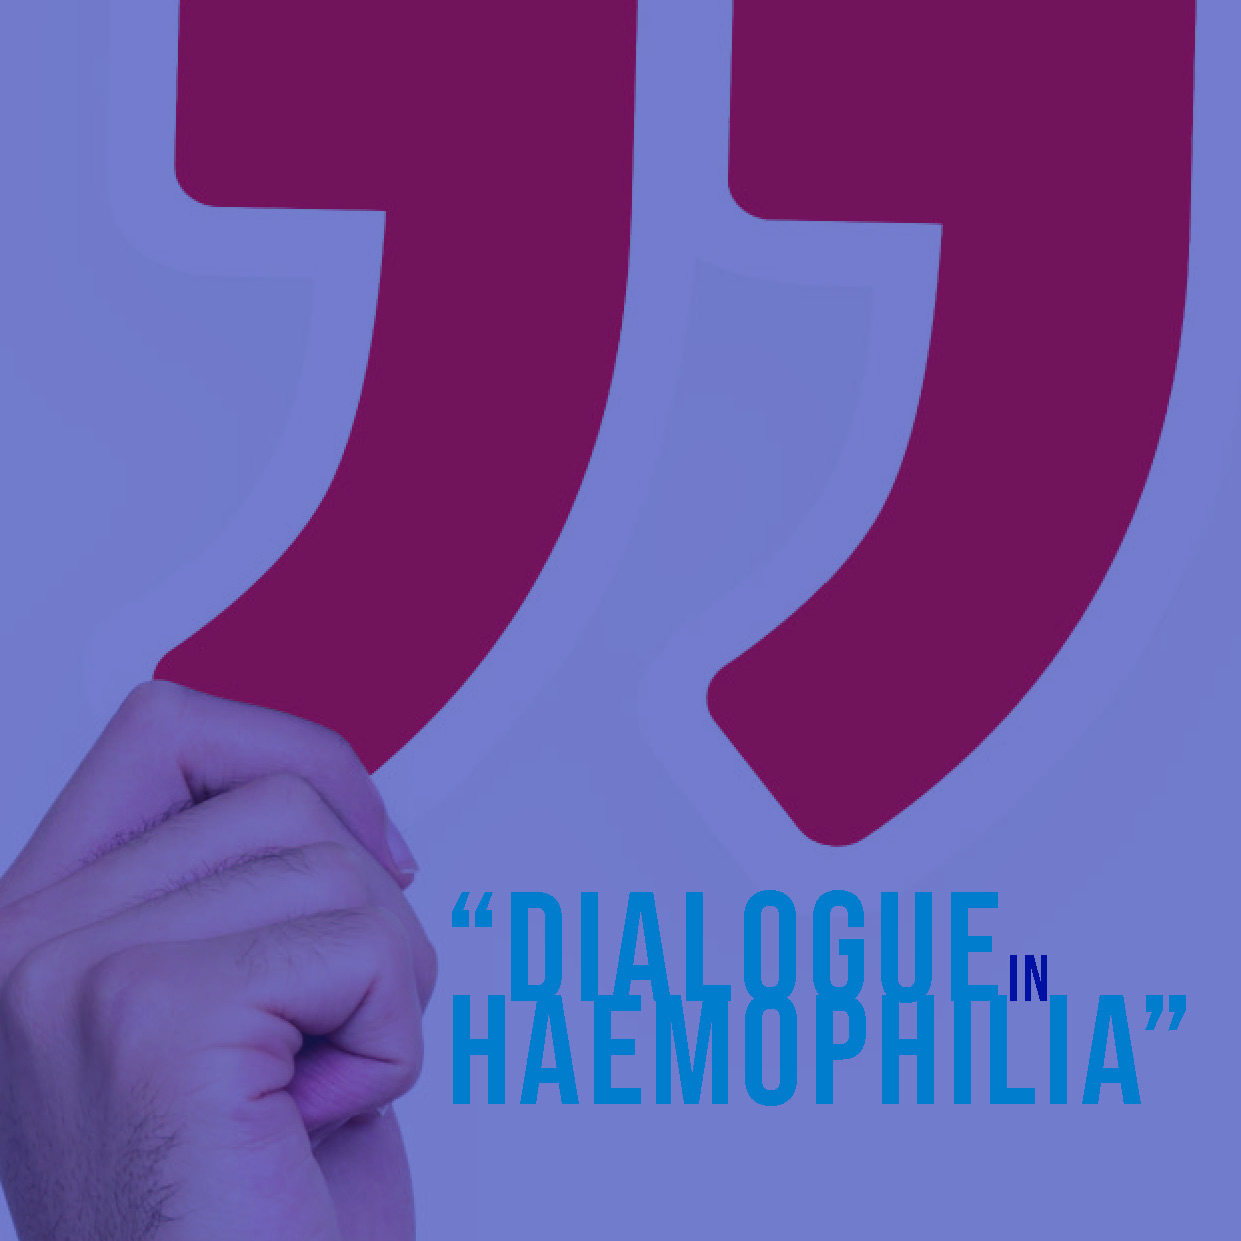 DIALOGUE ON  CHANGING  HAEMOPHILIA  “SUMMIT - Dialogue in Haemophilia”